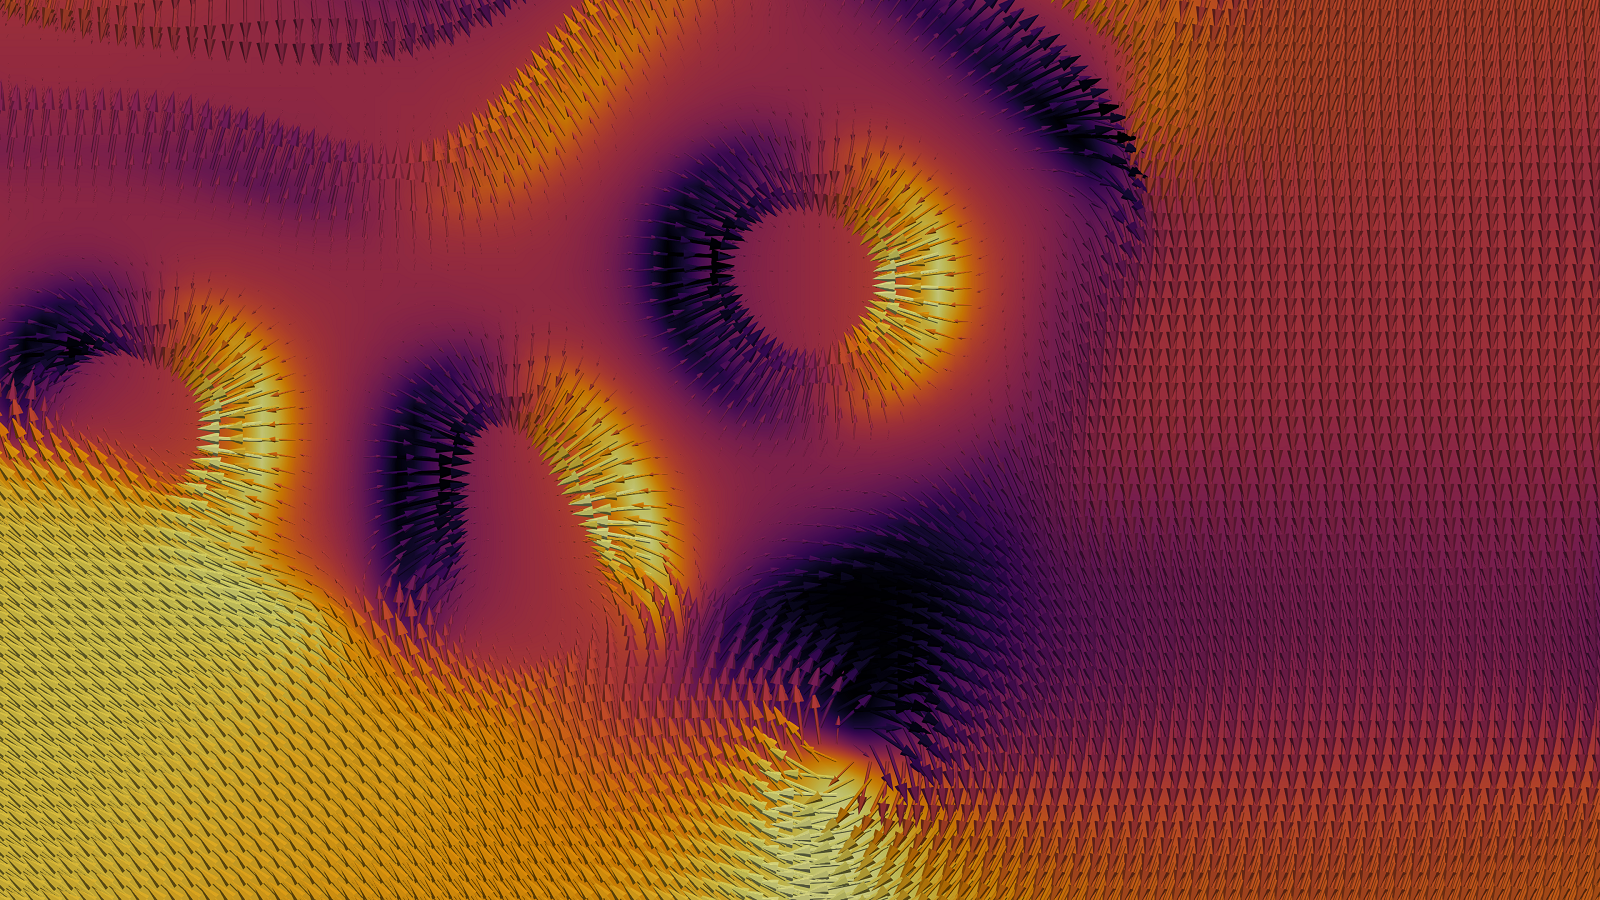 Orange/yellow shape with holes, 3D appearance. (Image created by University of Edinburgh based on microscopy images collected by Argonne on samples prepared at NHMFL.)